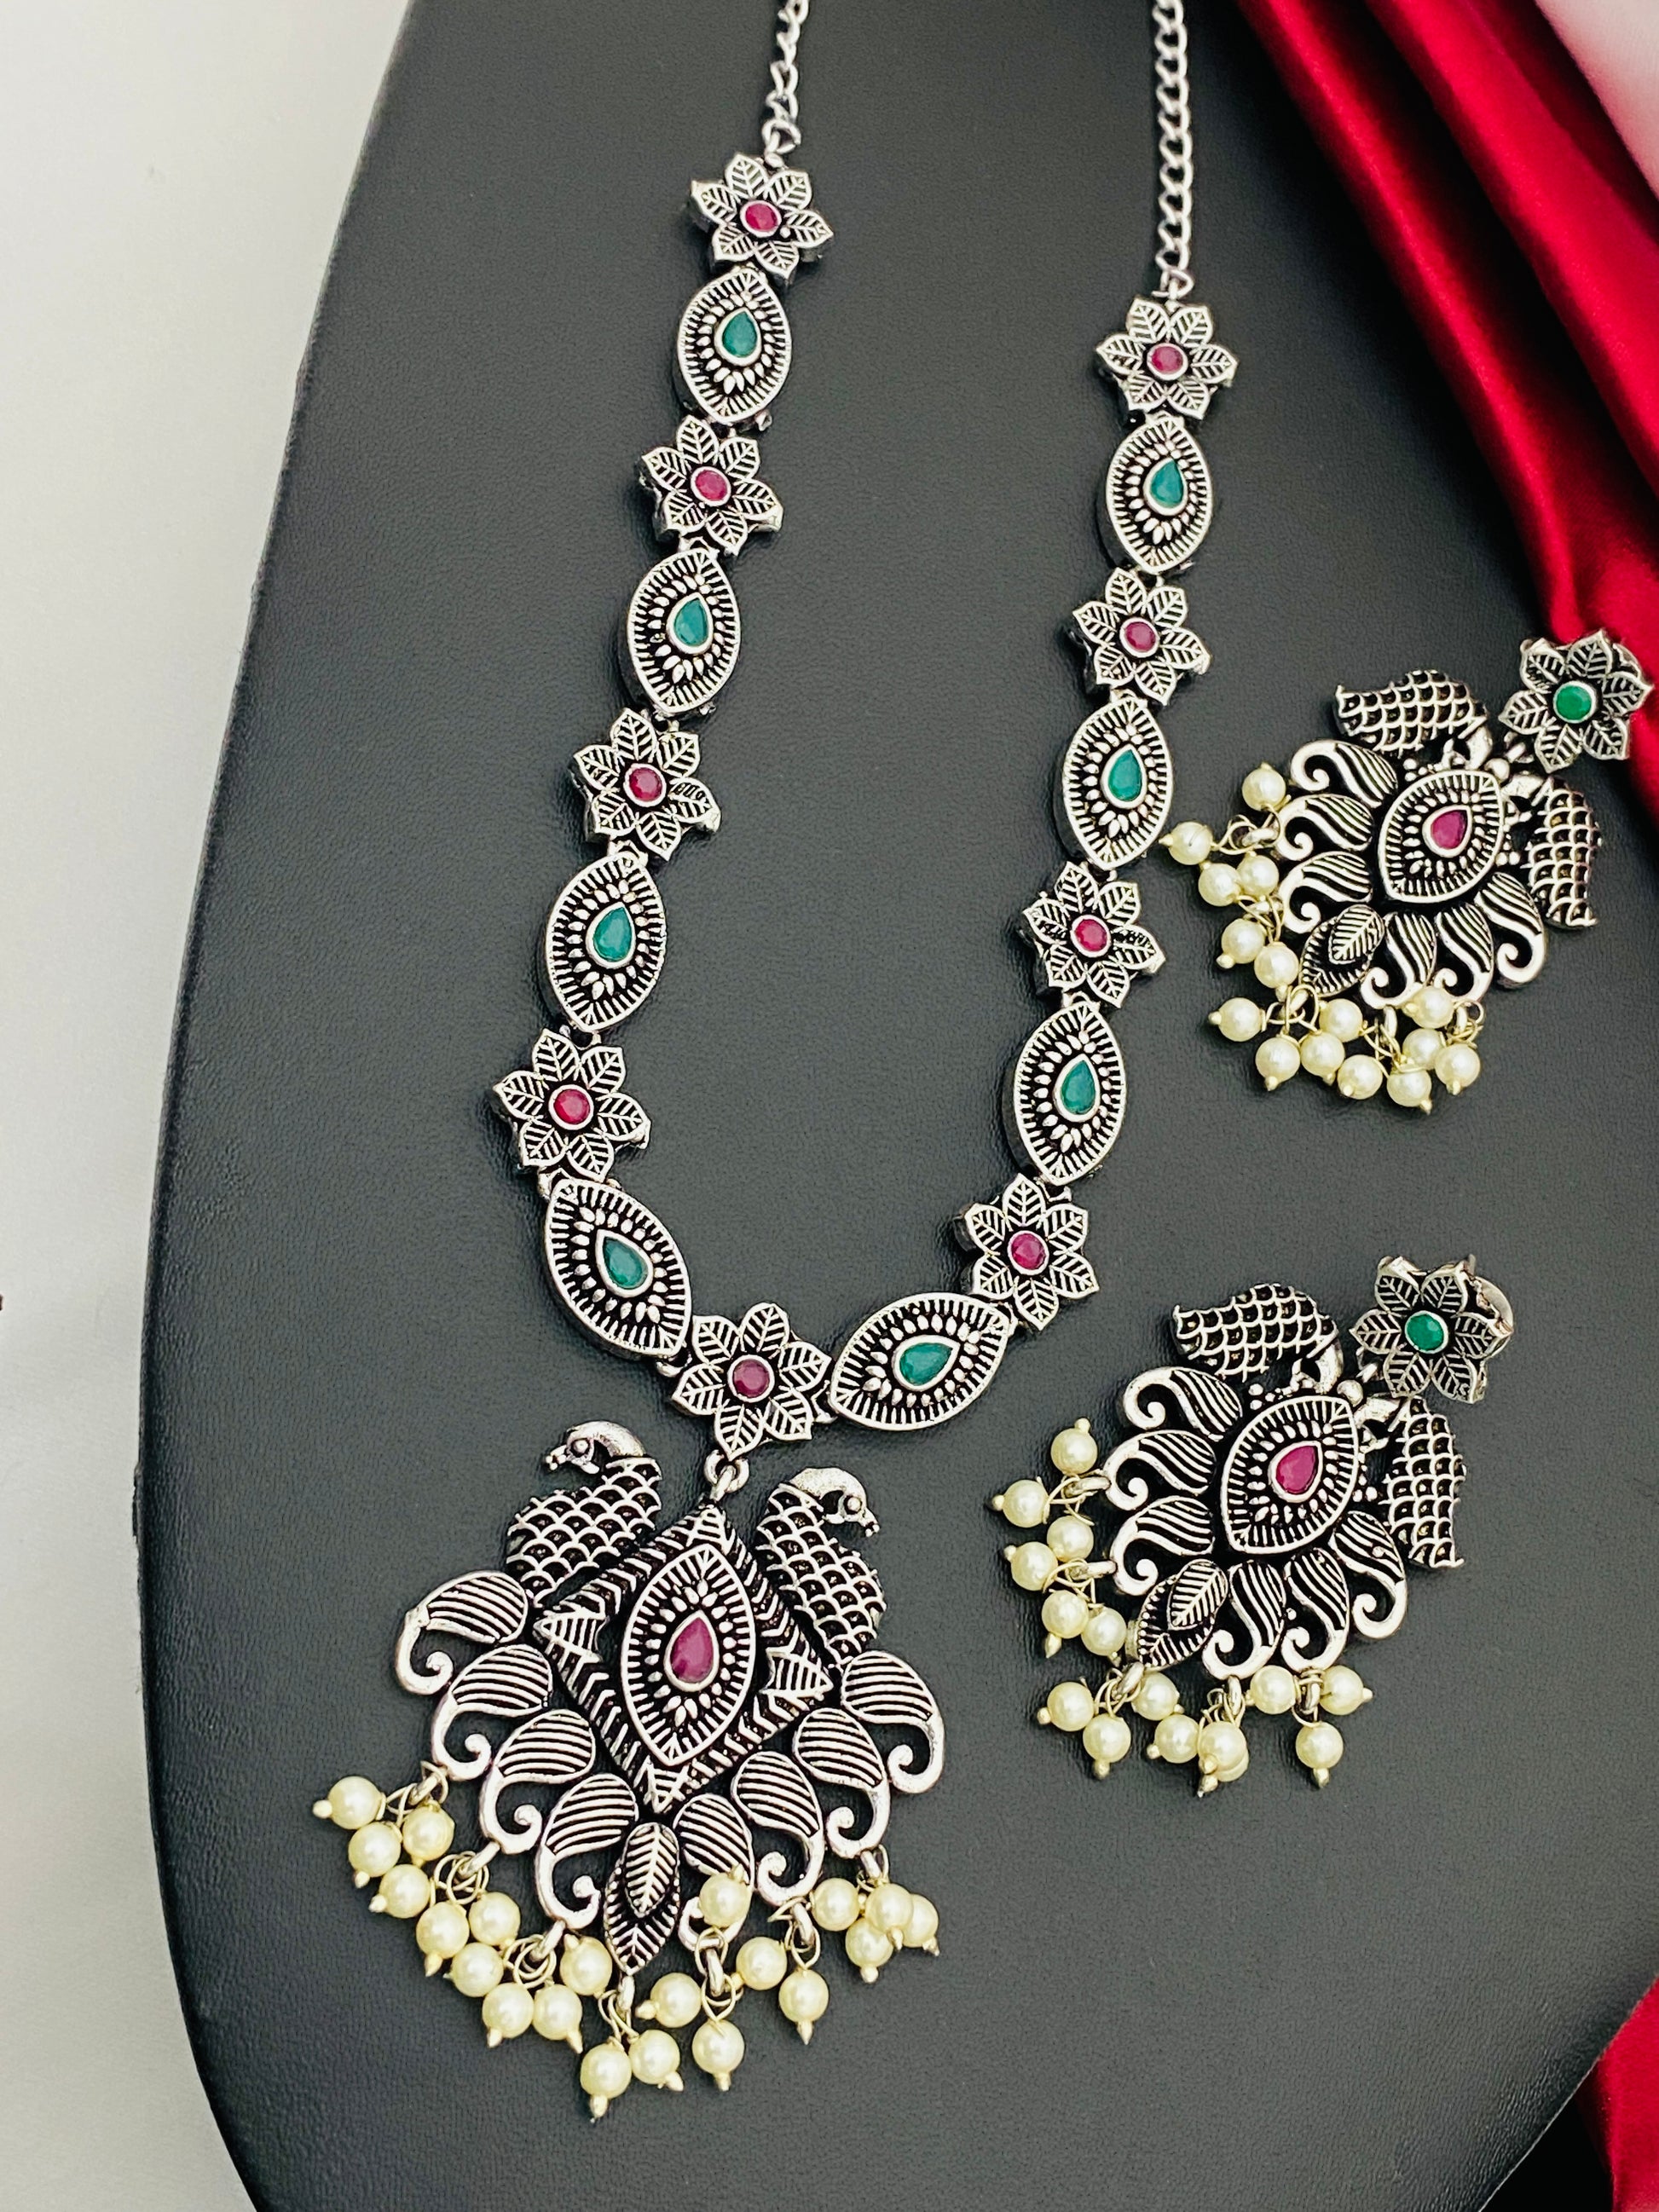 Dazzling Multi Color Stone Studded Peacock Floral Designed Silver Toned Oxidized Necklace With Earrings